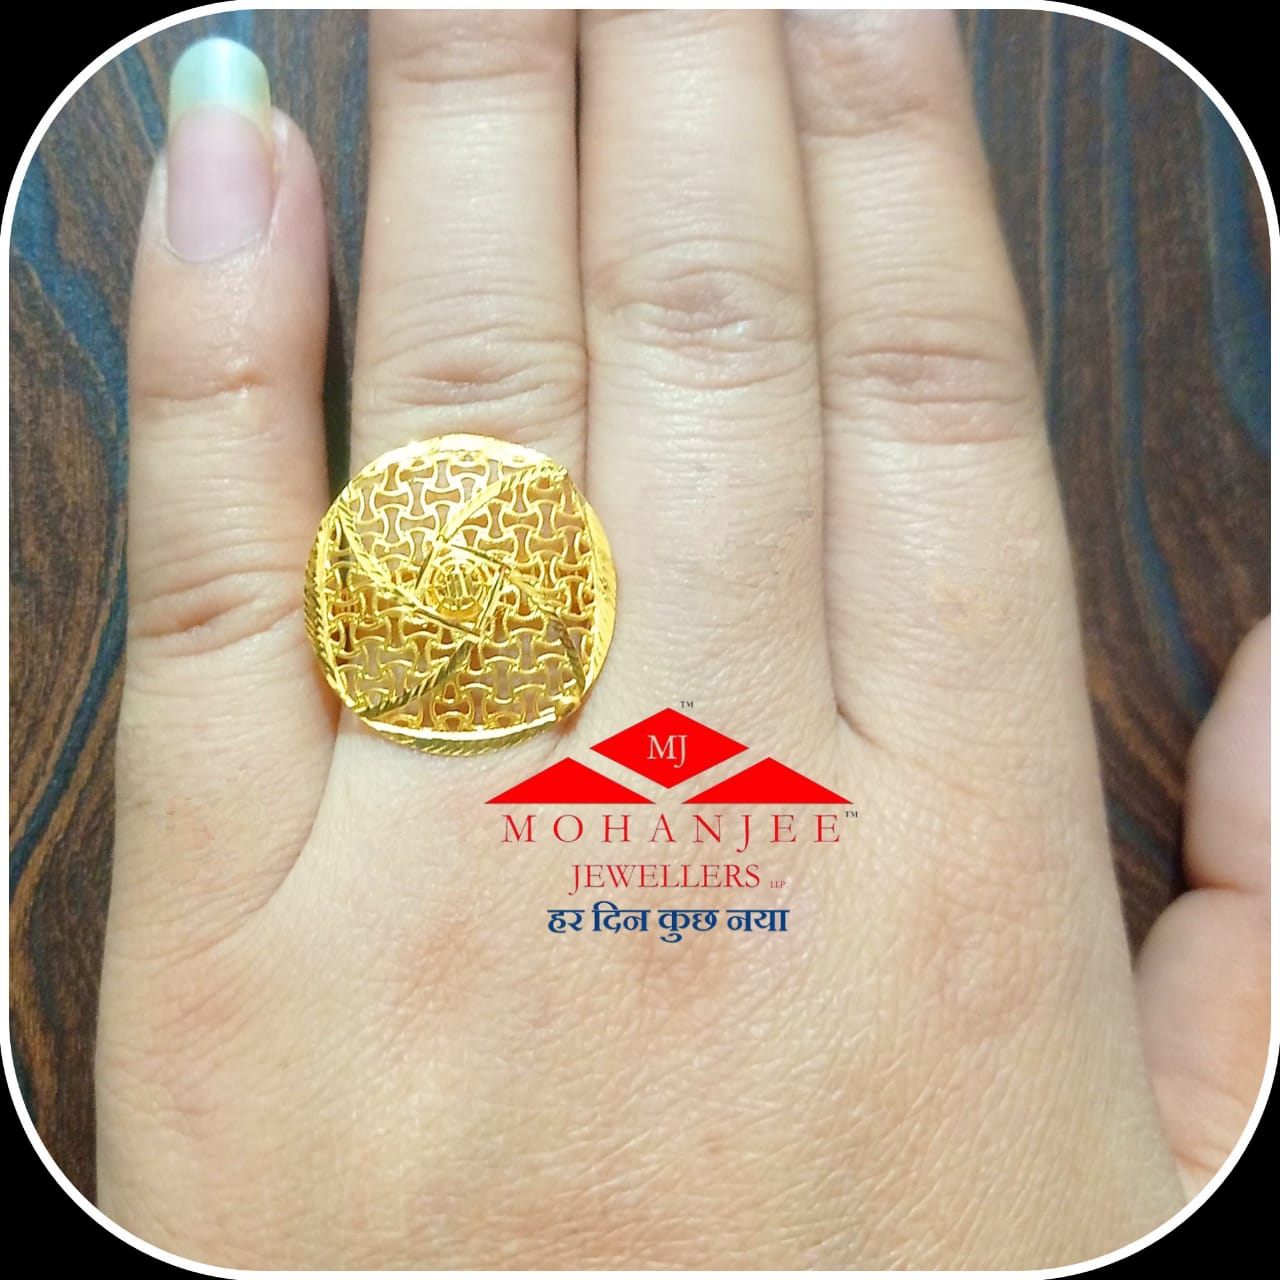 Nail Polish Gold Ring from Shyam Jewelers in Delhi